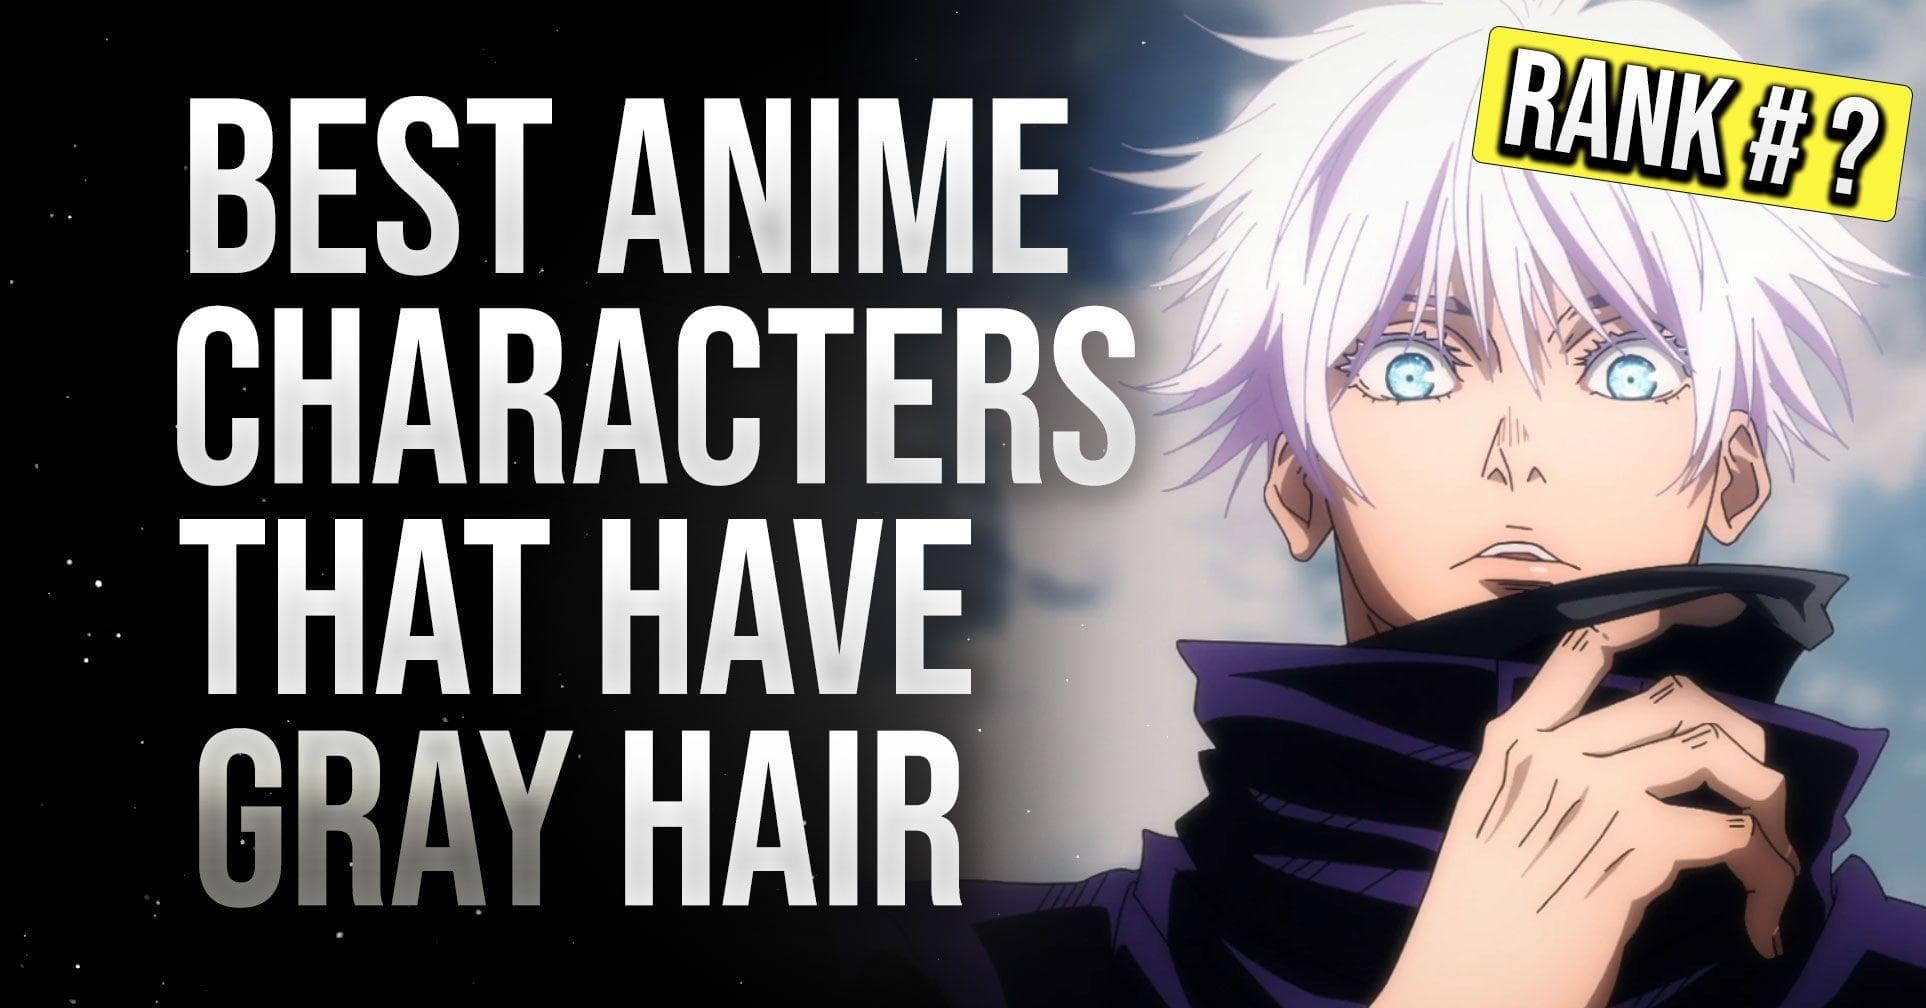 What Anime Character Are You? Which 1 of 9 Famous Characters